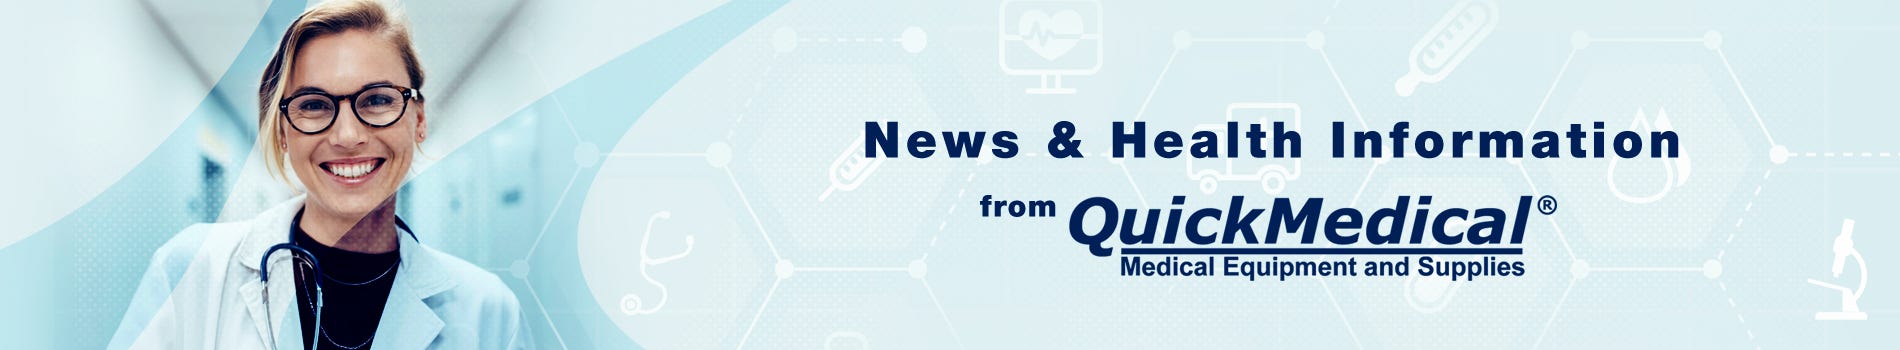 News and Health Information from QuickMedical